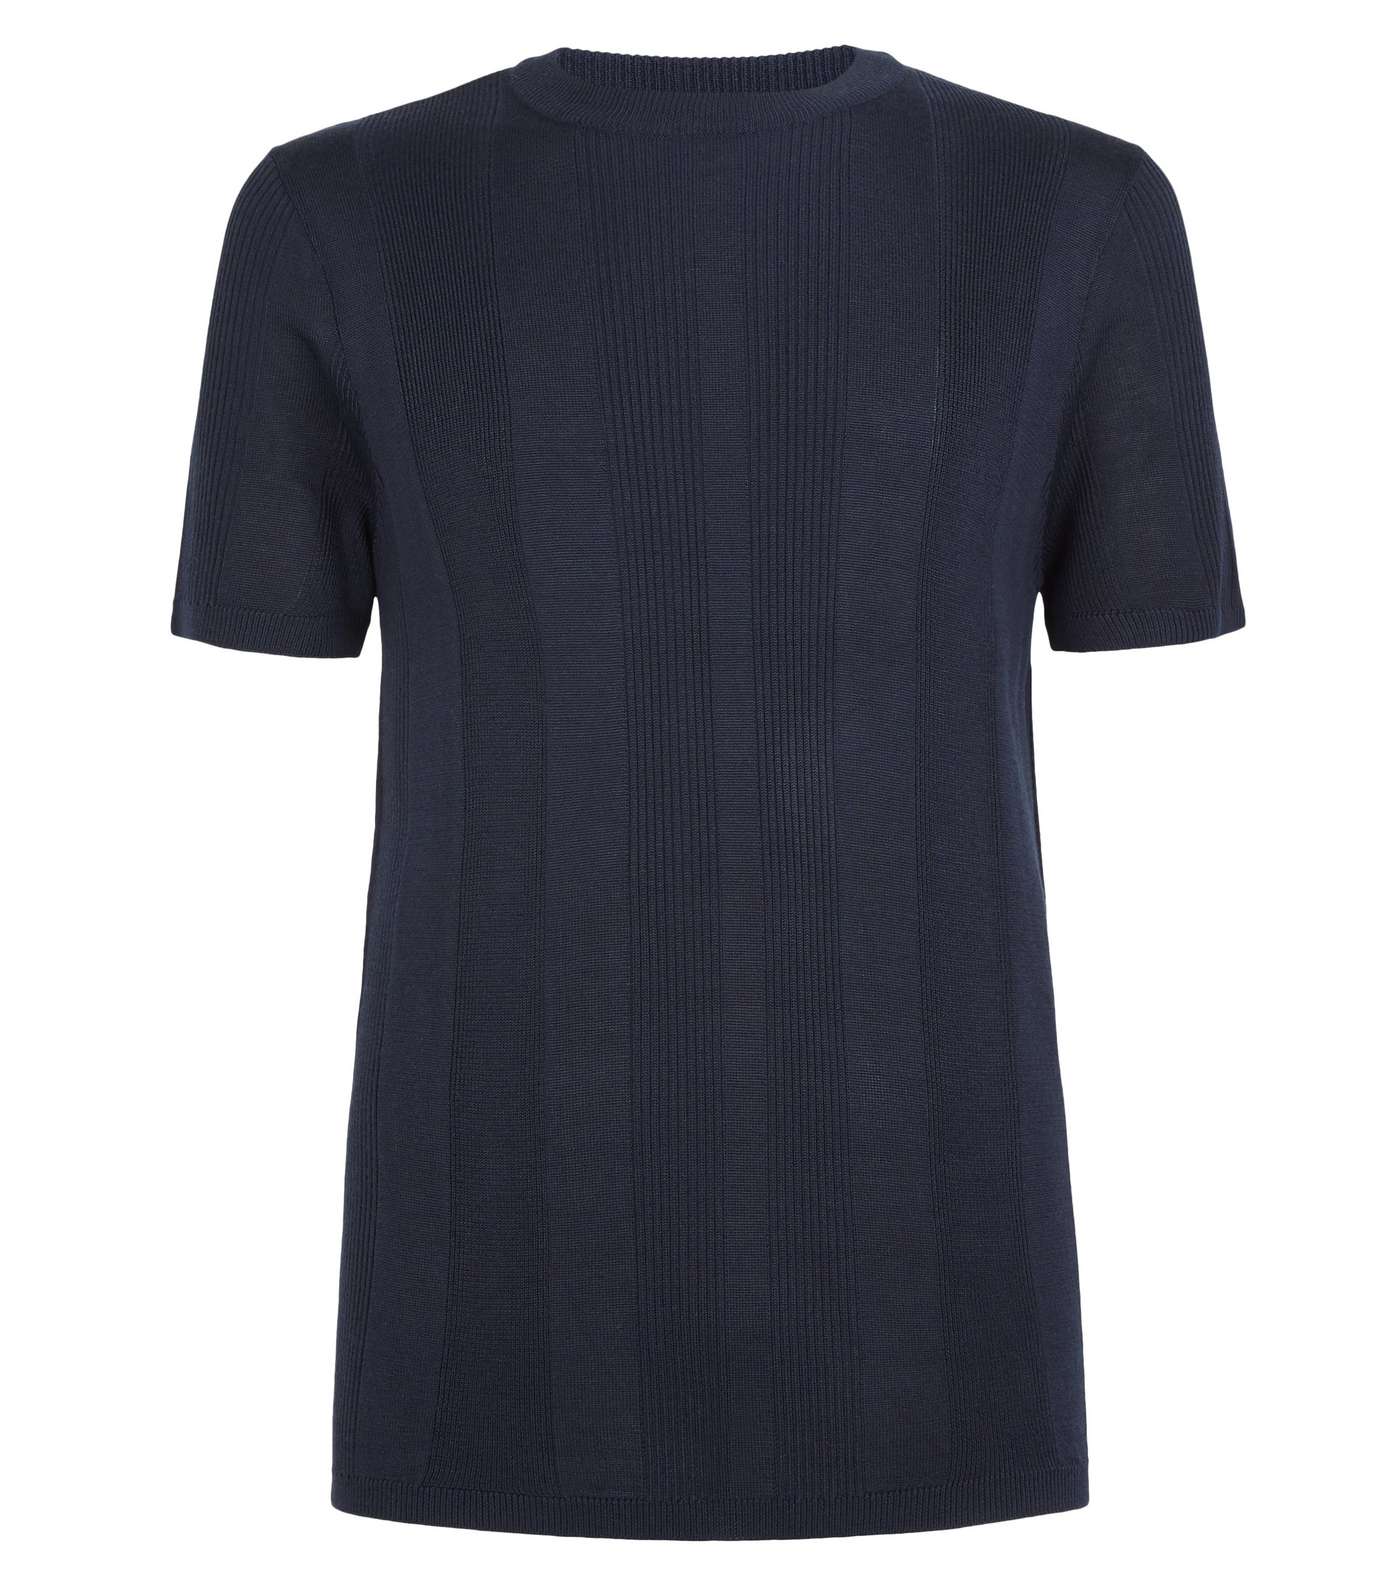 Navy Knit Short Sleeve Muscle Fit T-Shirt Image 4